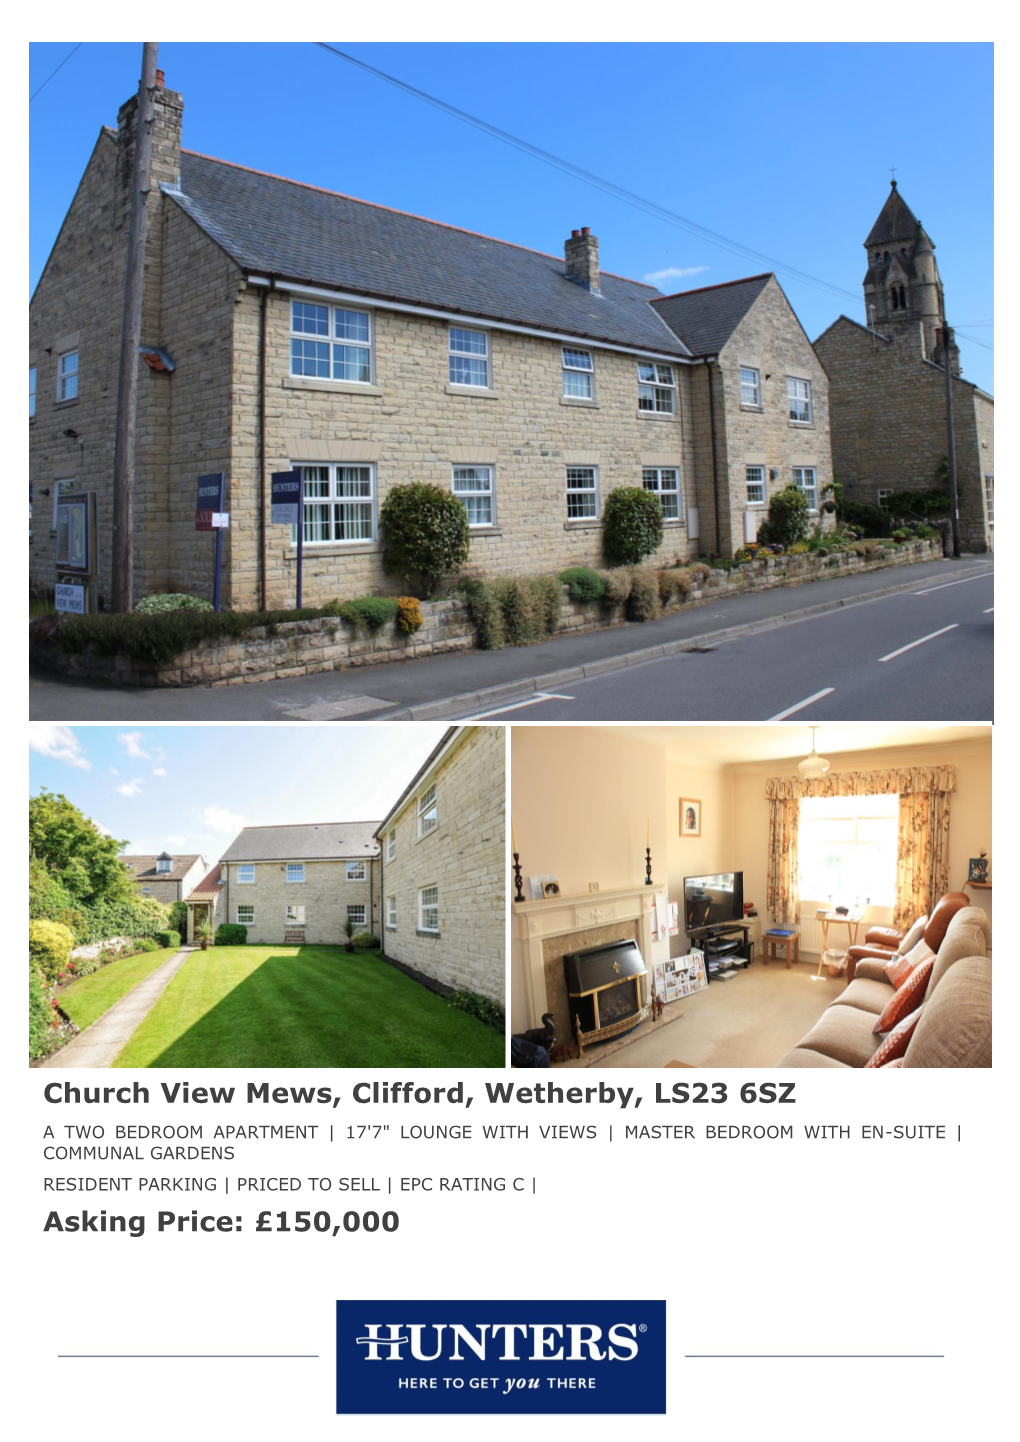 Church View Mews, Clifford, Wetherby, LS23 6SZ Asking Price: £150,000